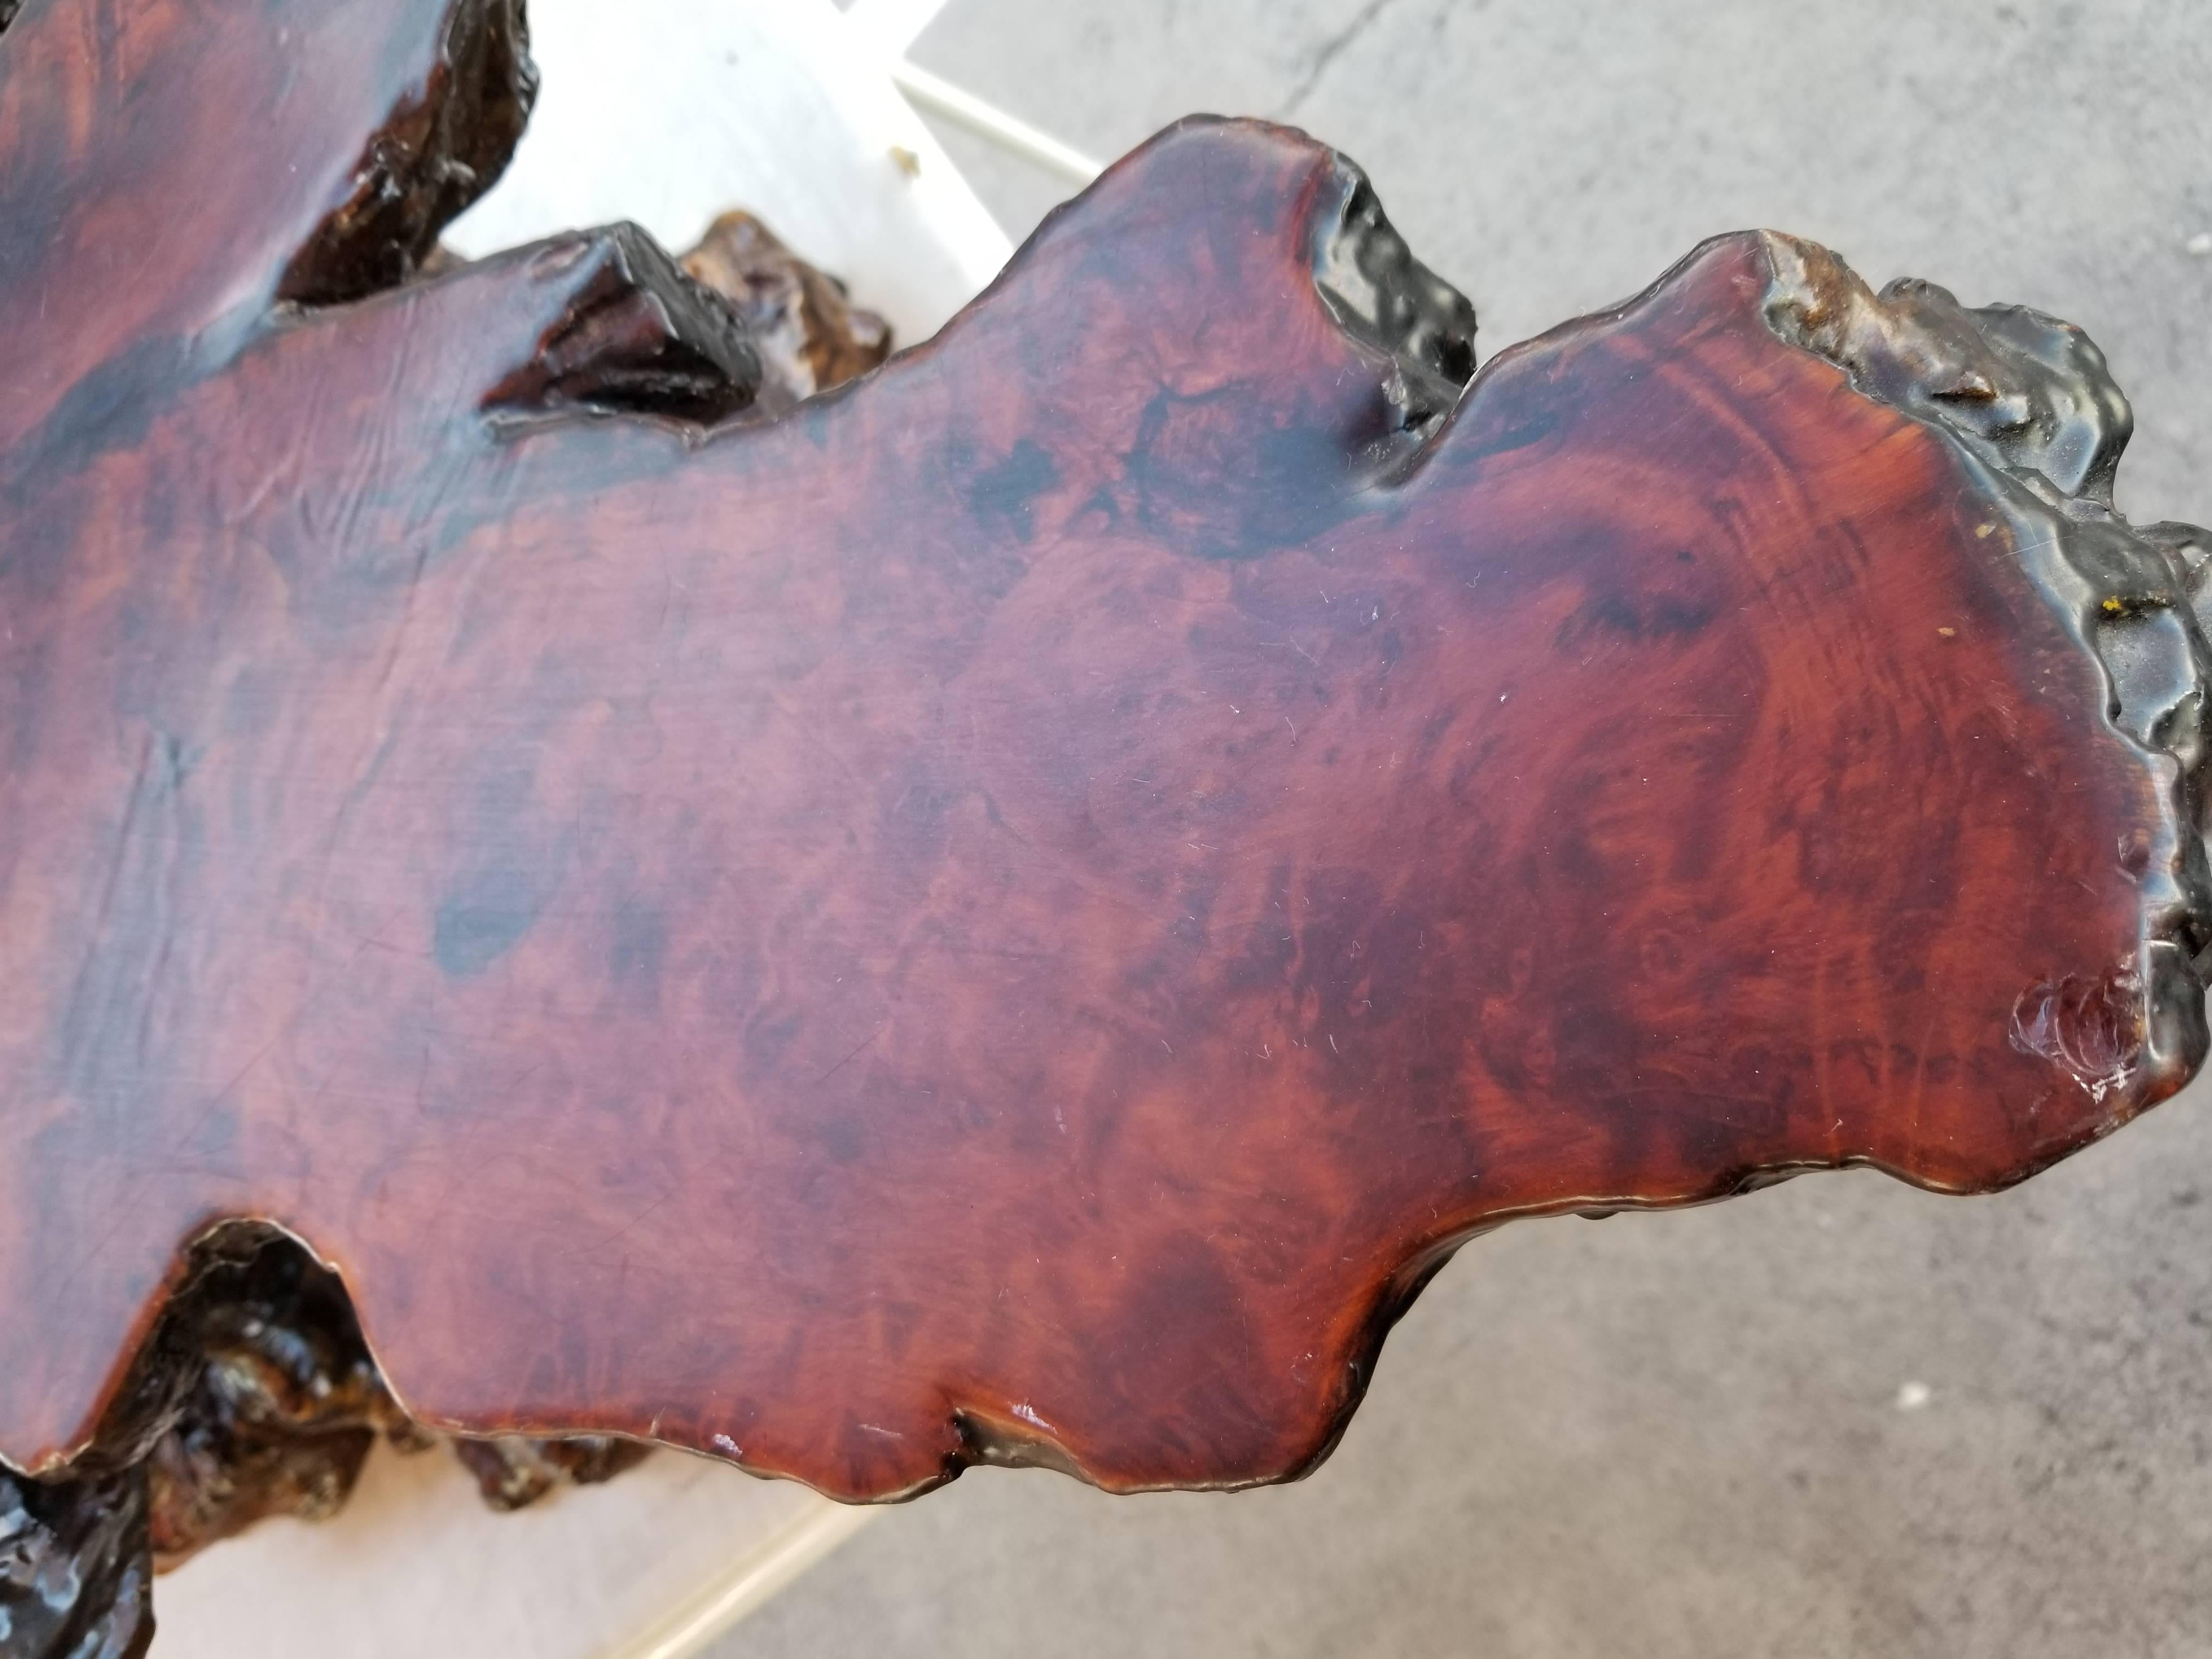 California Craft redwood burl coffee table with live edge top and burl root base, circa 1970s.